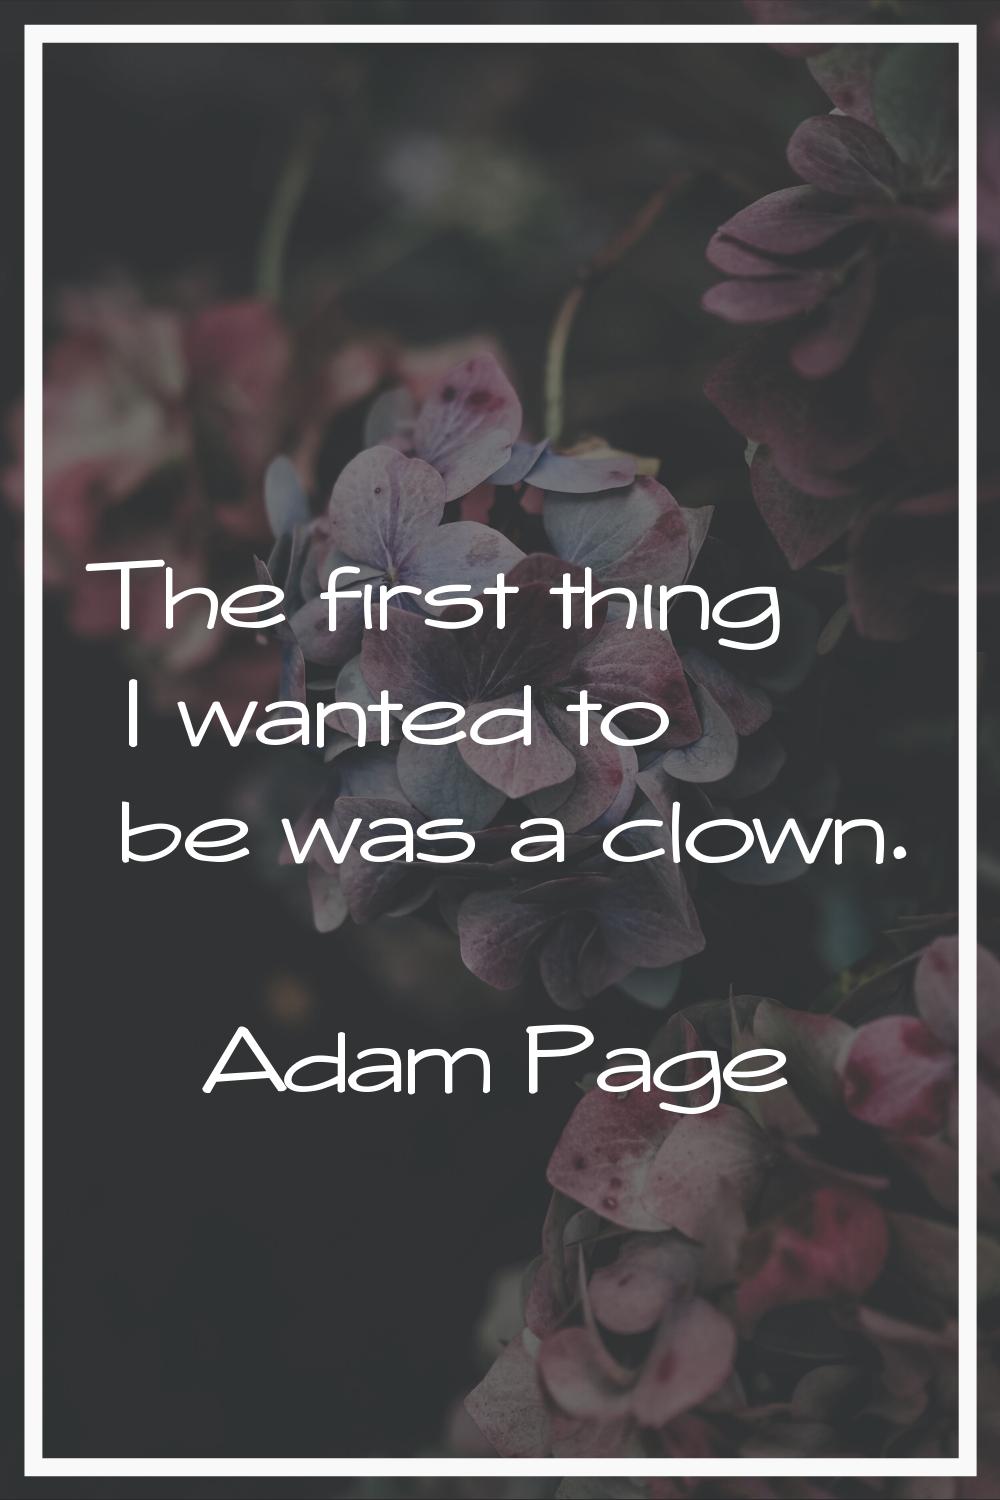 The first thing I wanted to be was a clown.